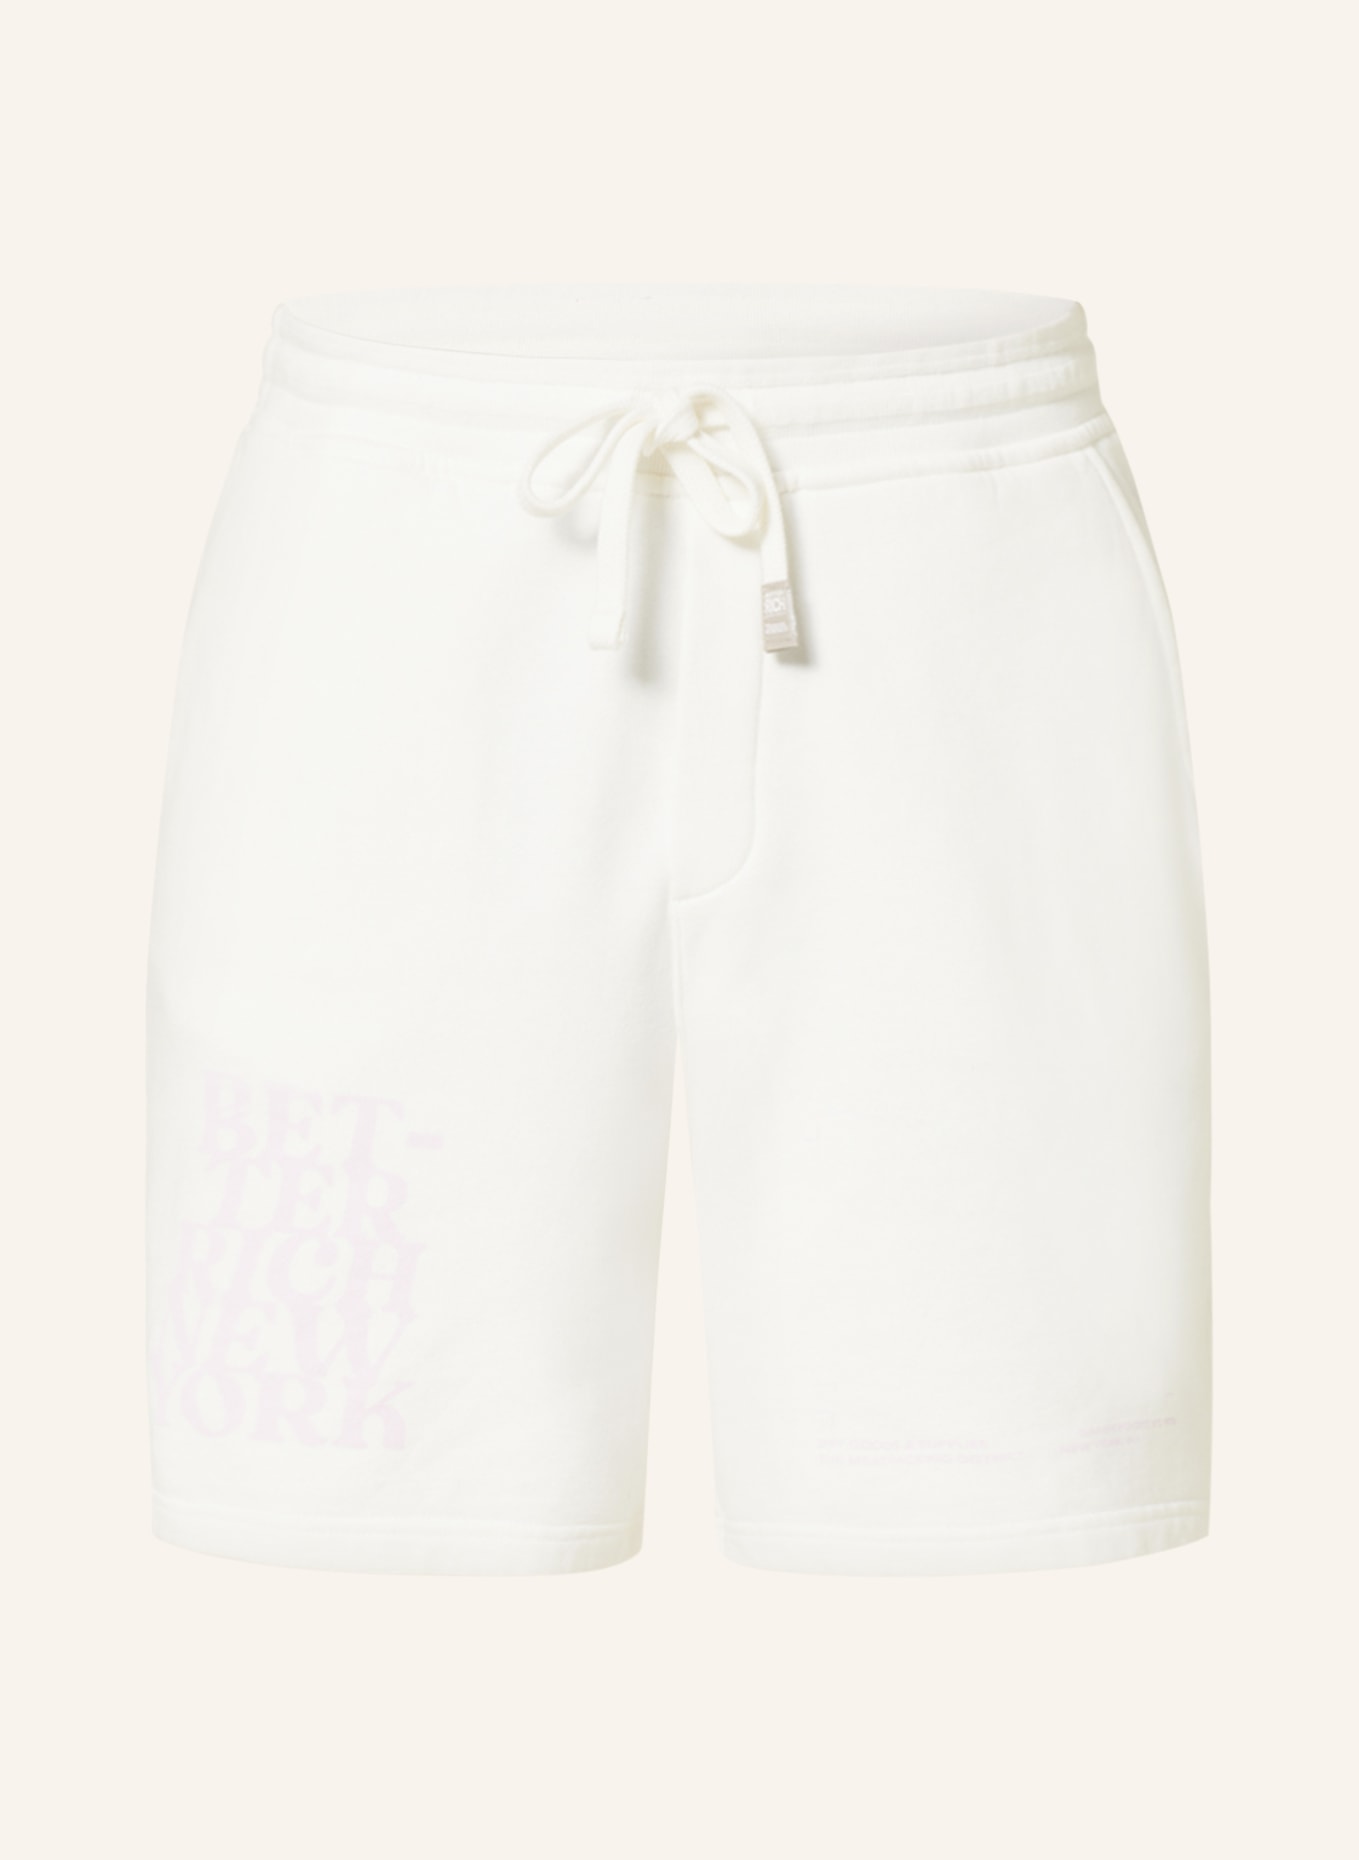 BETTER RICH Sweat shorts RON regular fit, Color: WHITE (Image 1)